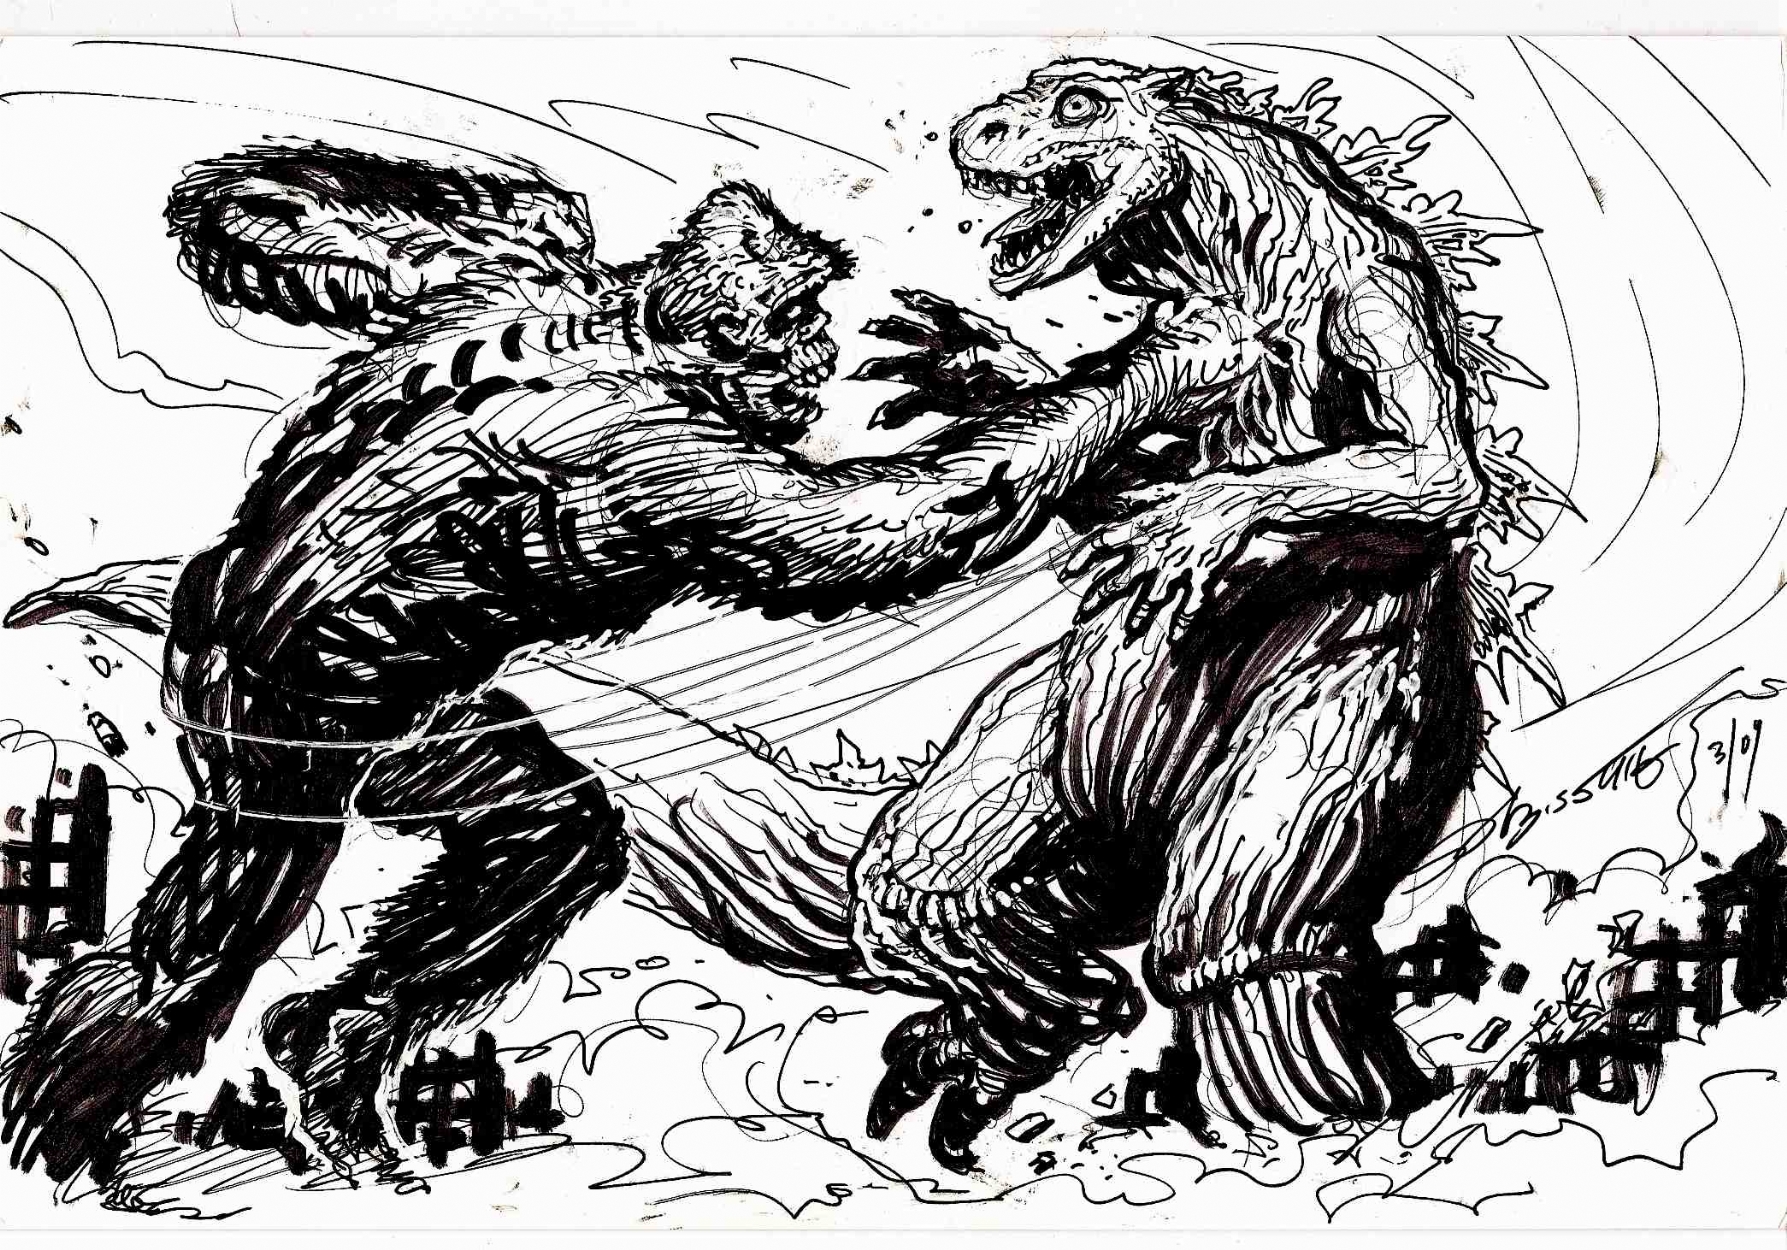 985 Simple King Kong Vs Godzilla Coloring Pages for Kids